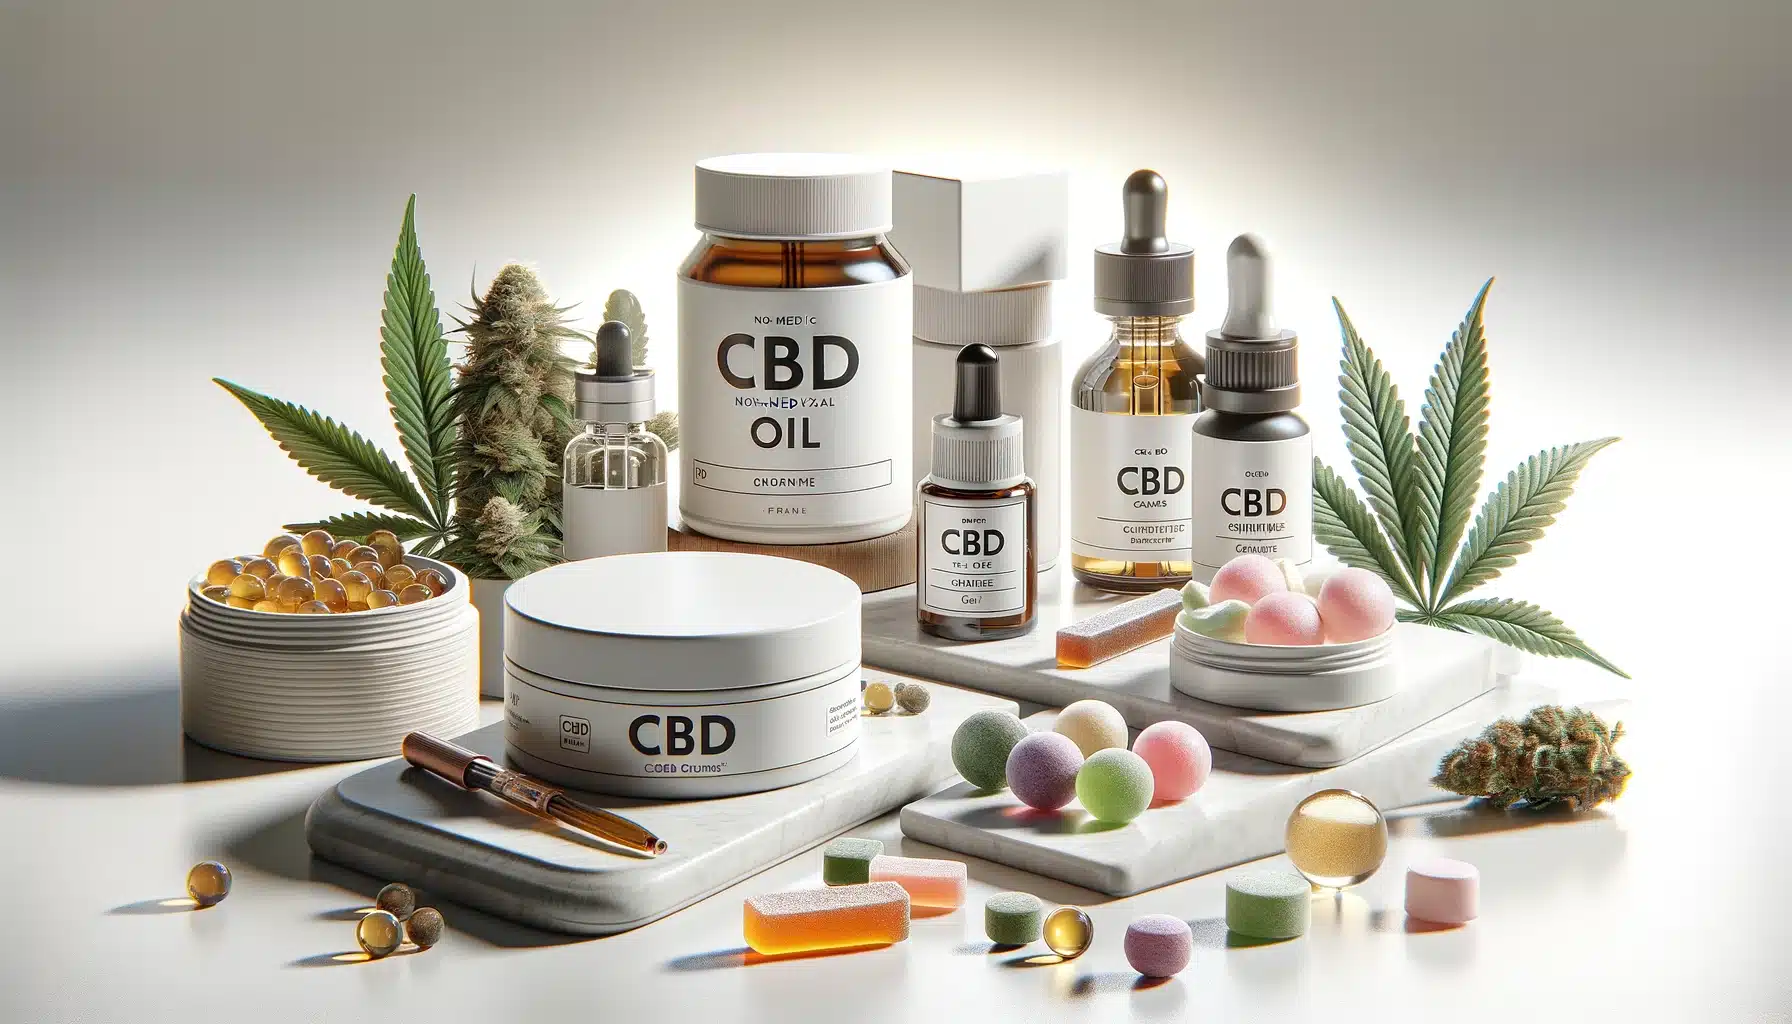 DALL·E 2024 02 12 02.13.48 Create a landscape oriented image suitable for an online CBD store in France. The image should feature non medical CBD products such as CBD oil gummi